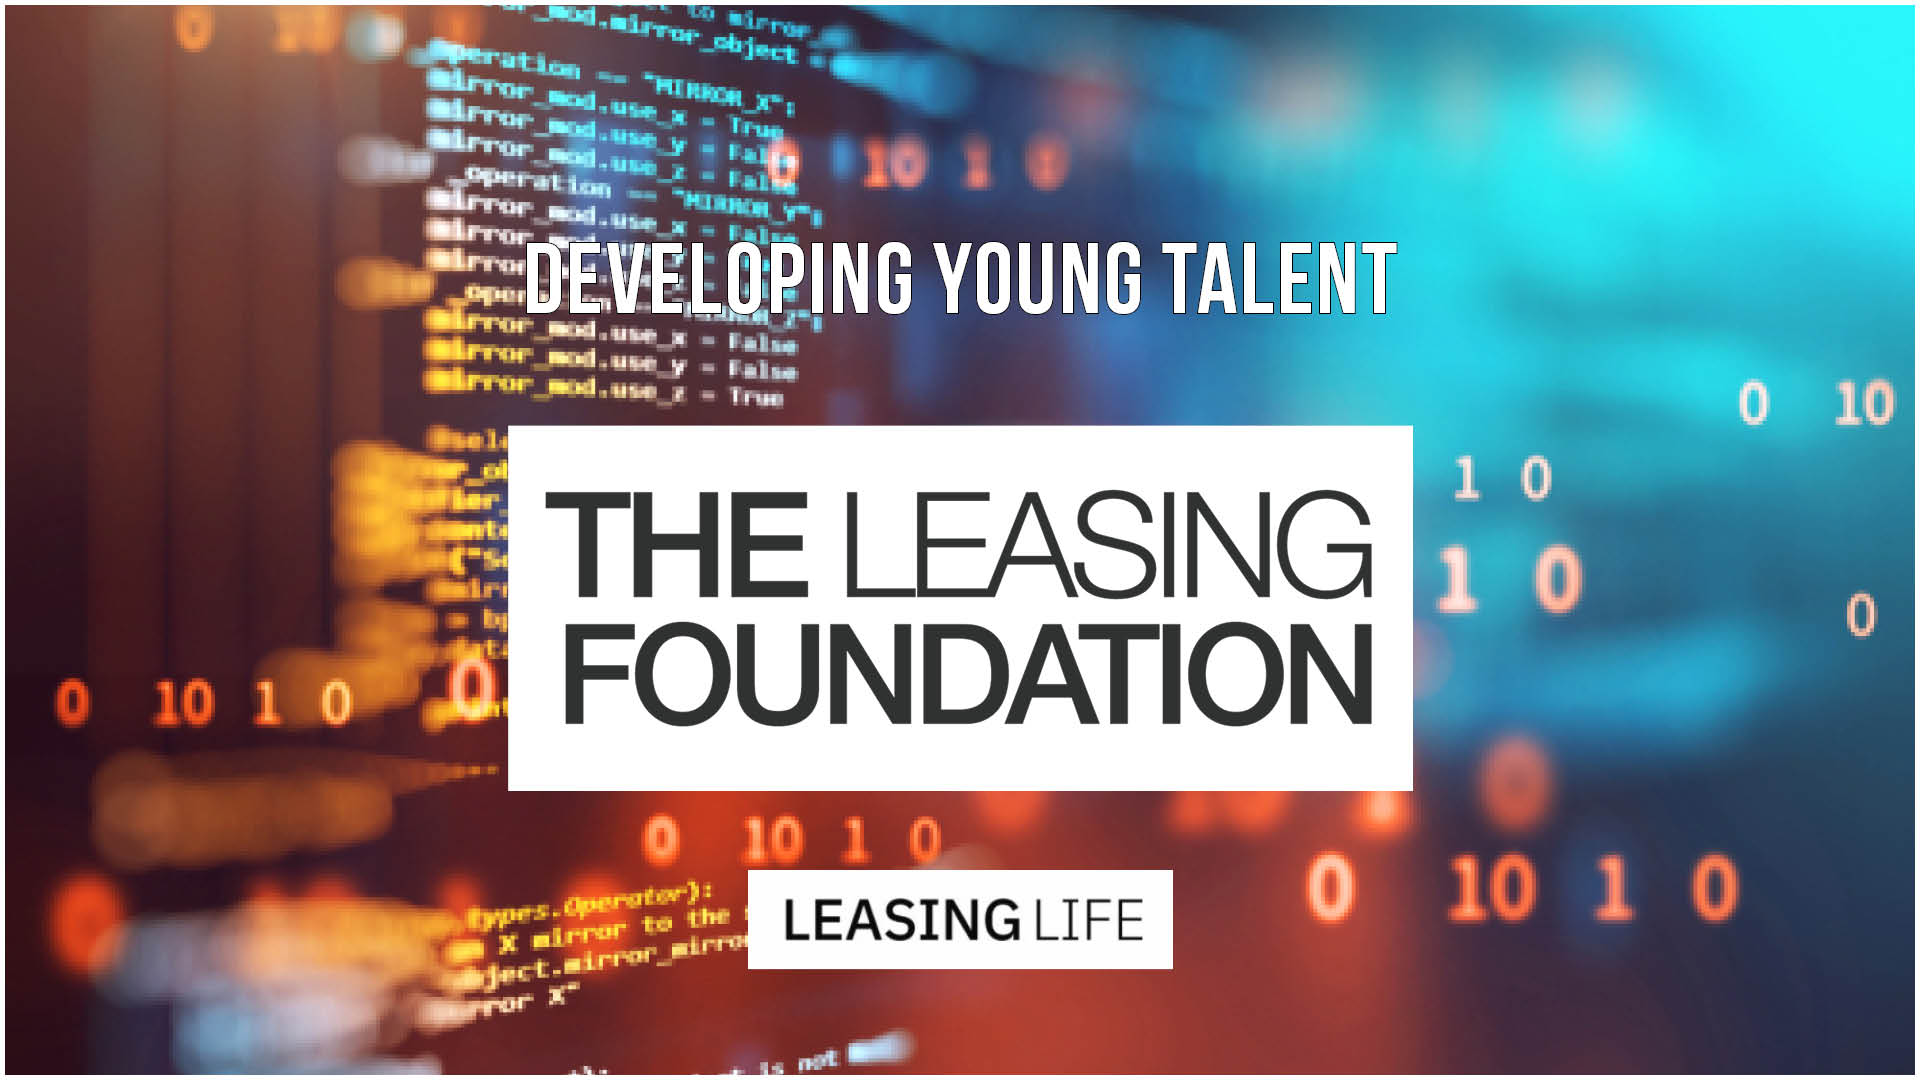 Text: Developing young talent - The Leasing Foundation - Leasing Life on background of numbers